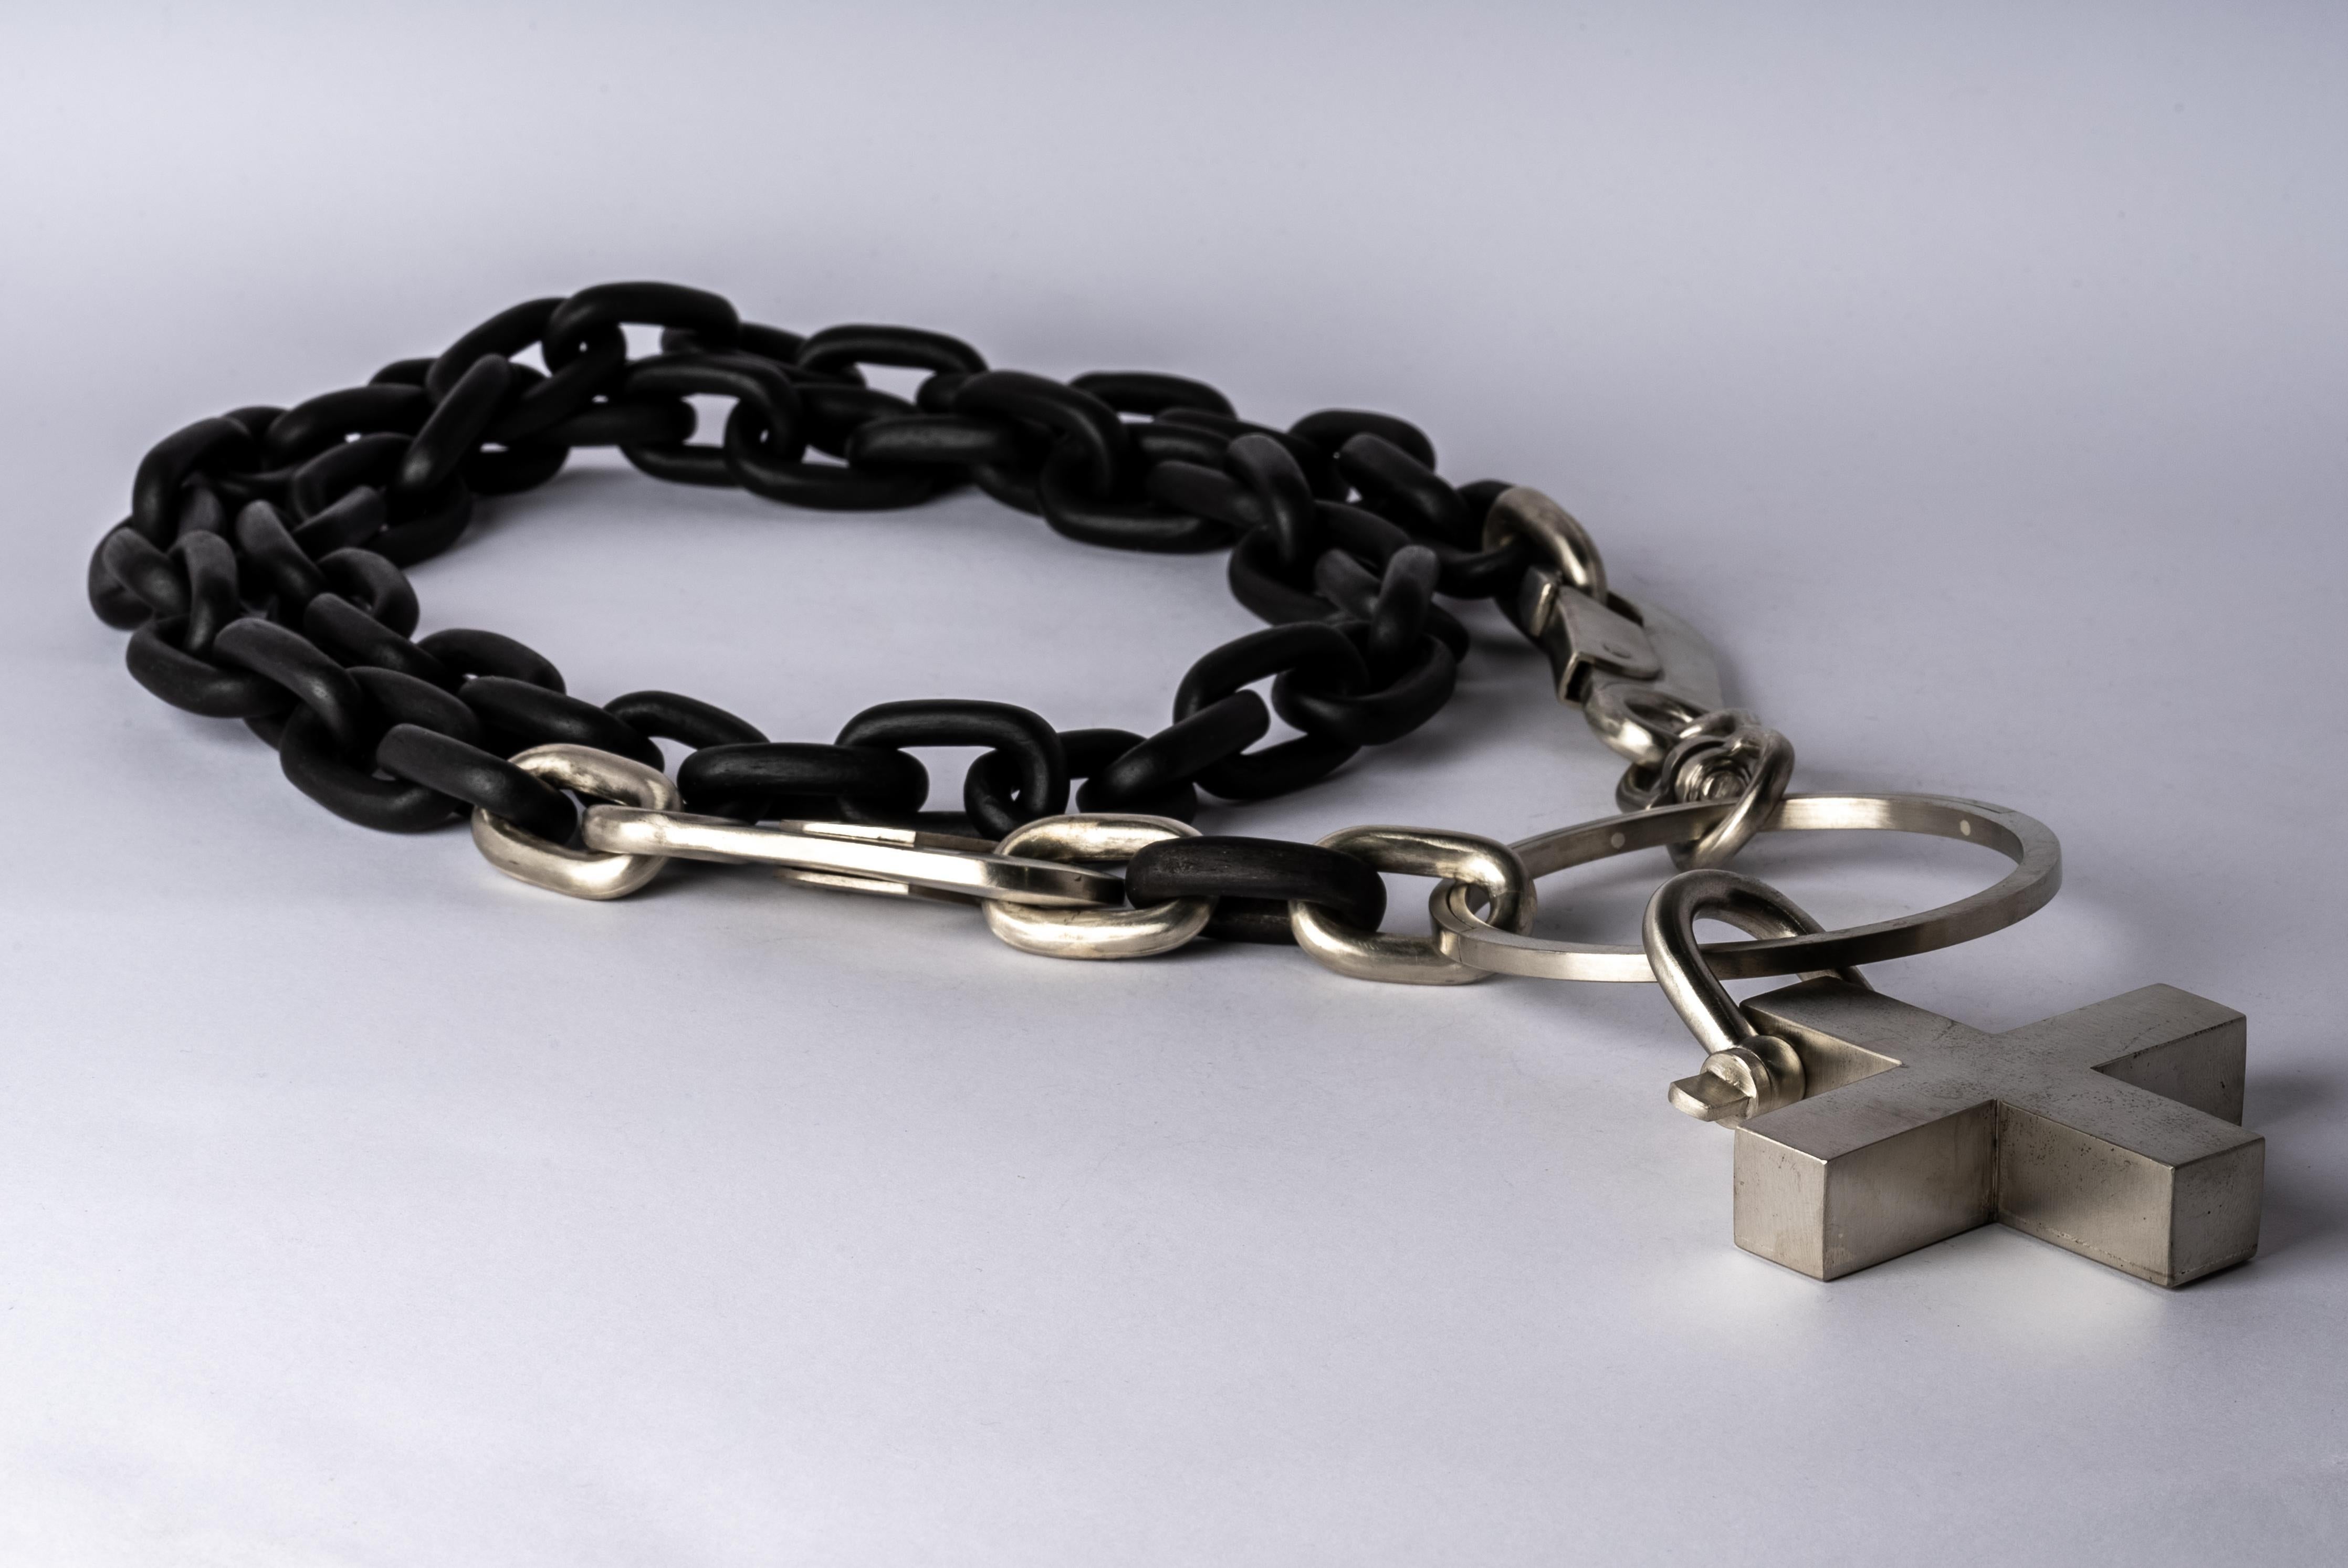 All organic chains are carved by hand. In the case of the chains made of wood, they are absolutely seamless; carved from a single long slab of wood (see link). The chain is completed by a system of pendant : a portal and a plus charm. 
Chain length: